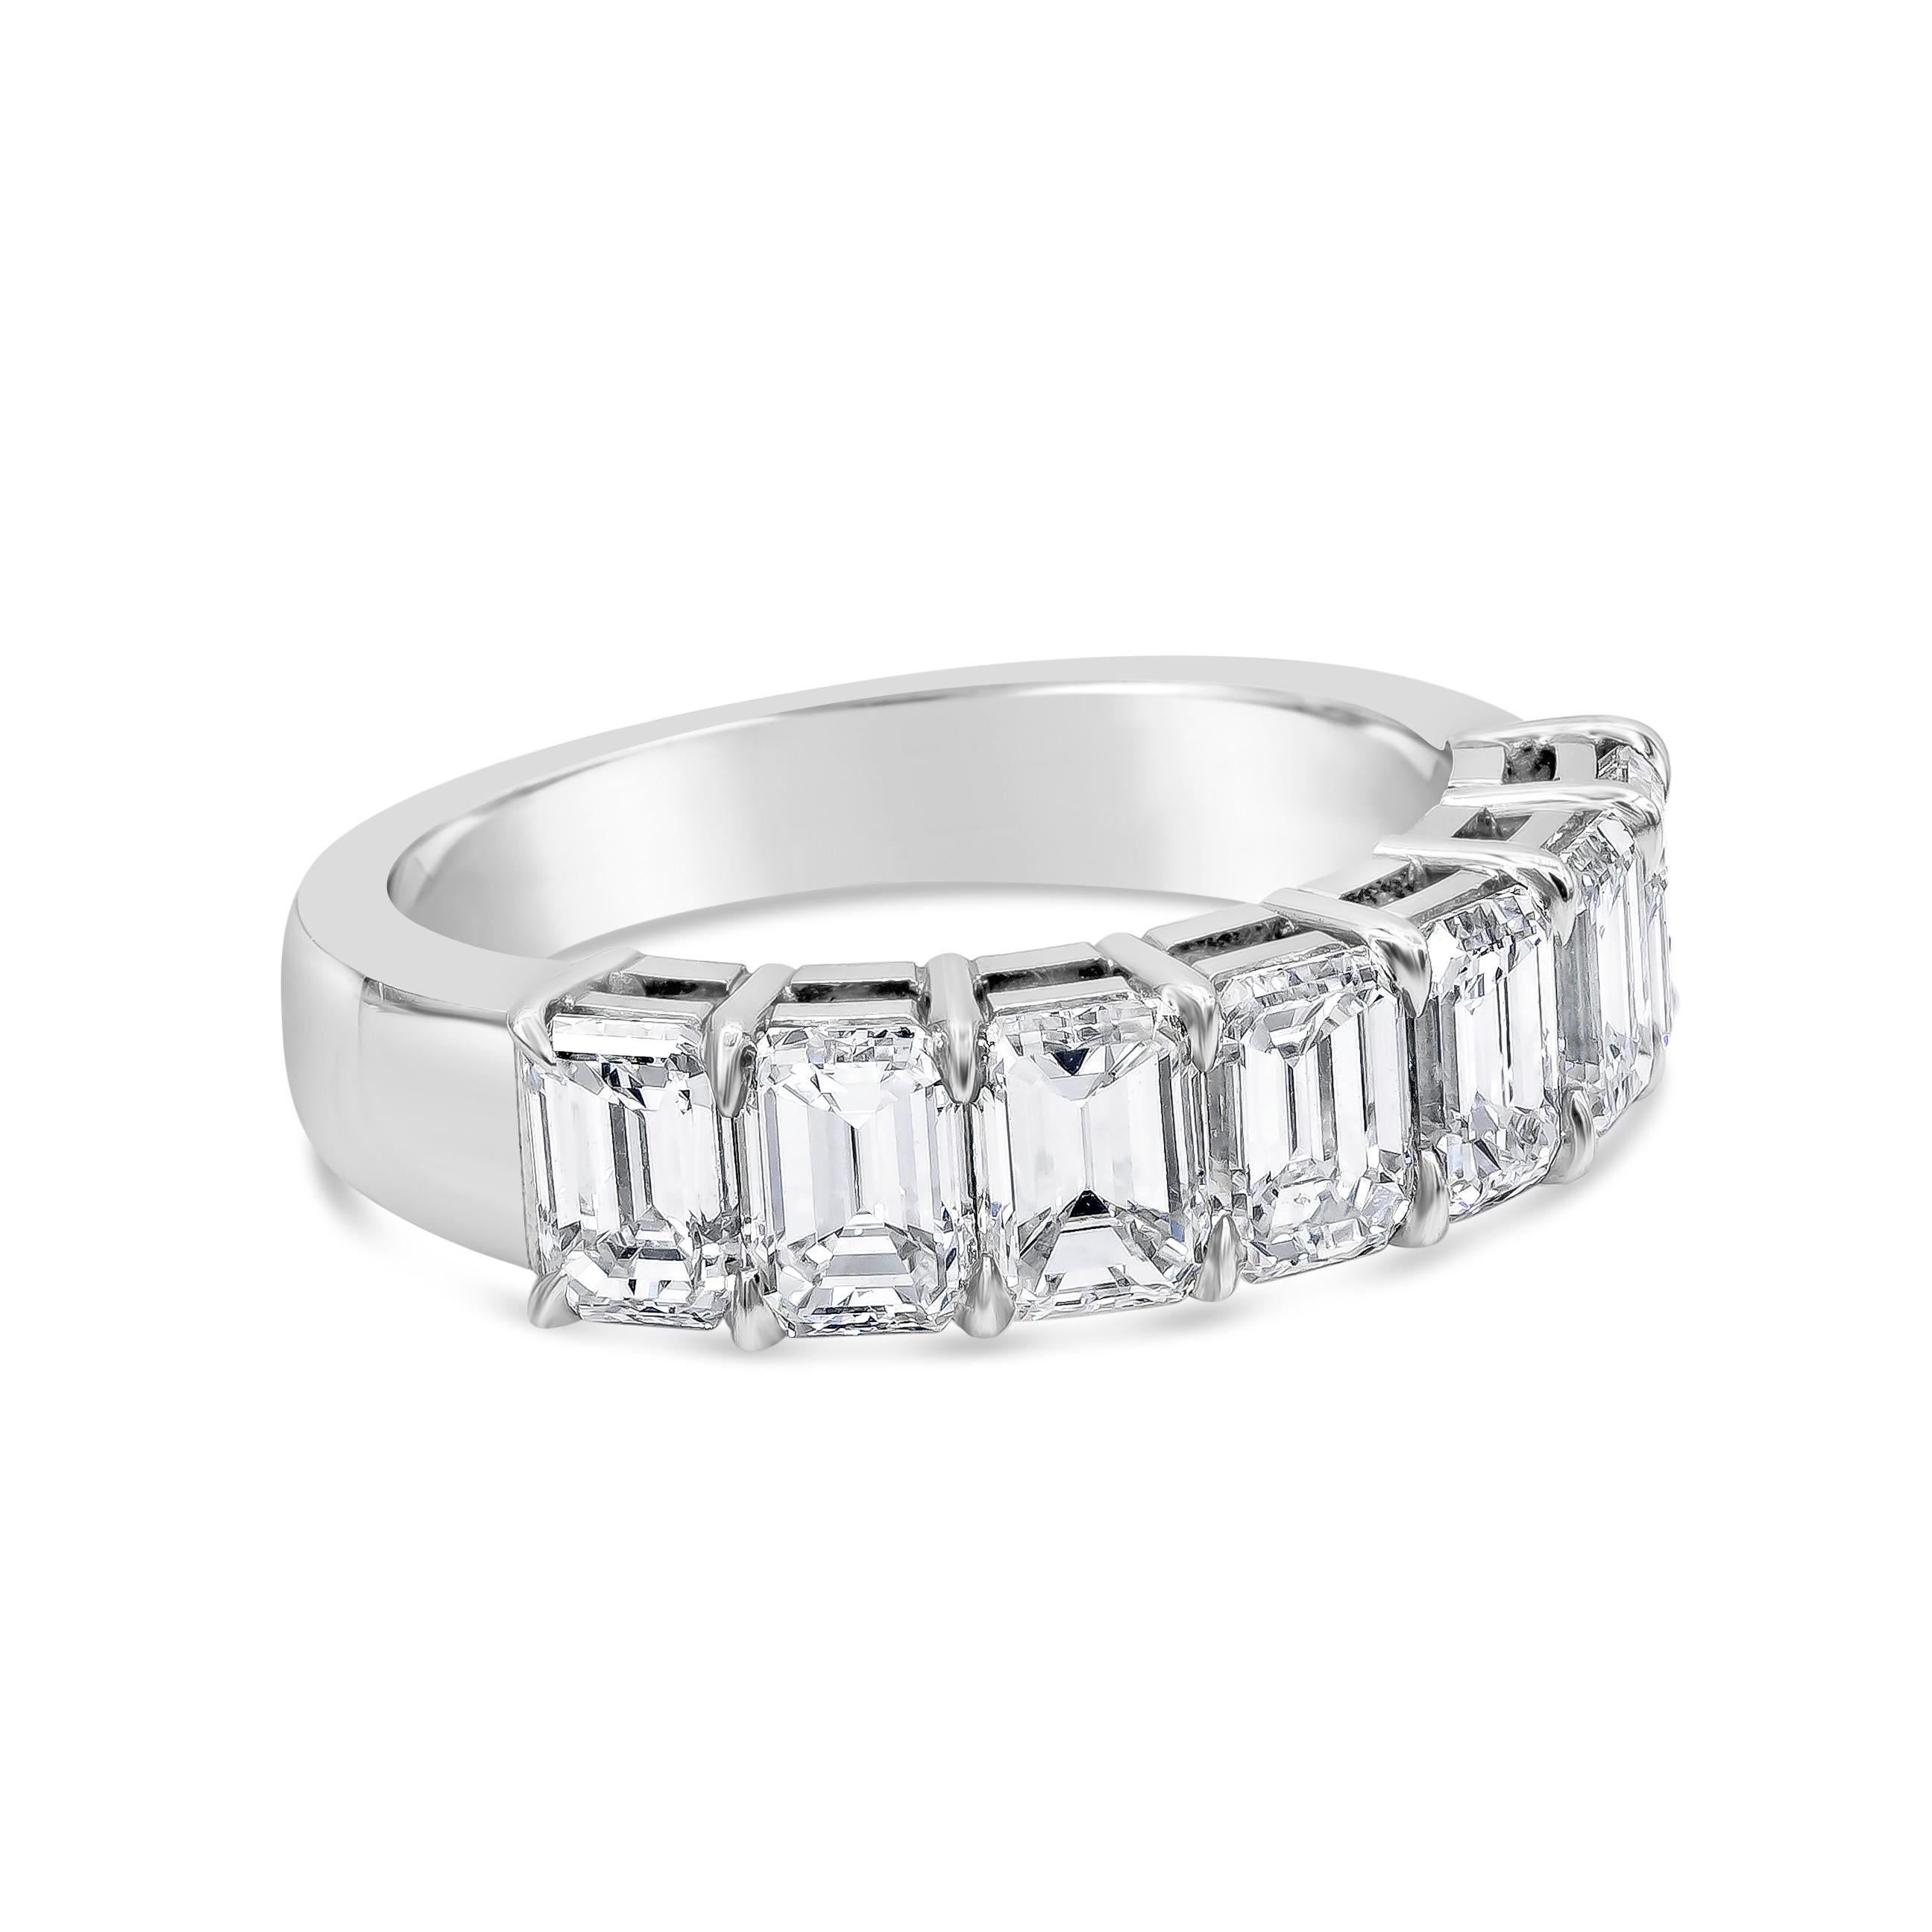 A timeless classic showcasing a seven-stone wedding band ring. 3.23 carat total emerald cut diamonds elegantly set in an air gallery setting. Made with Platinum. Size 6 US

Style available in different price ranges. Prices are based on your